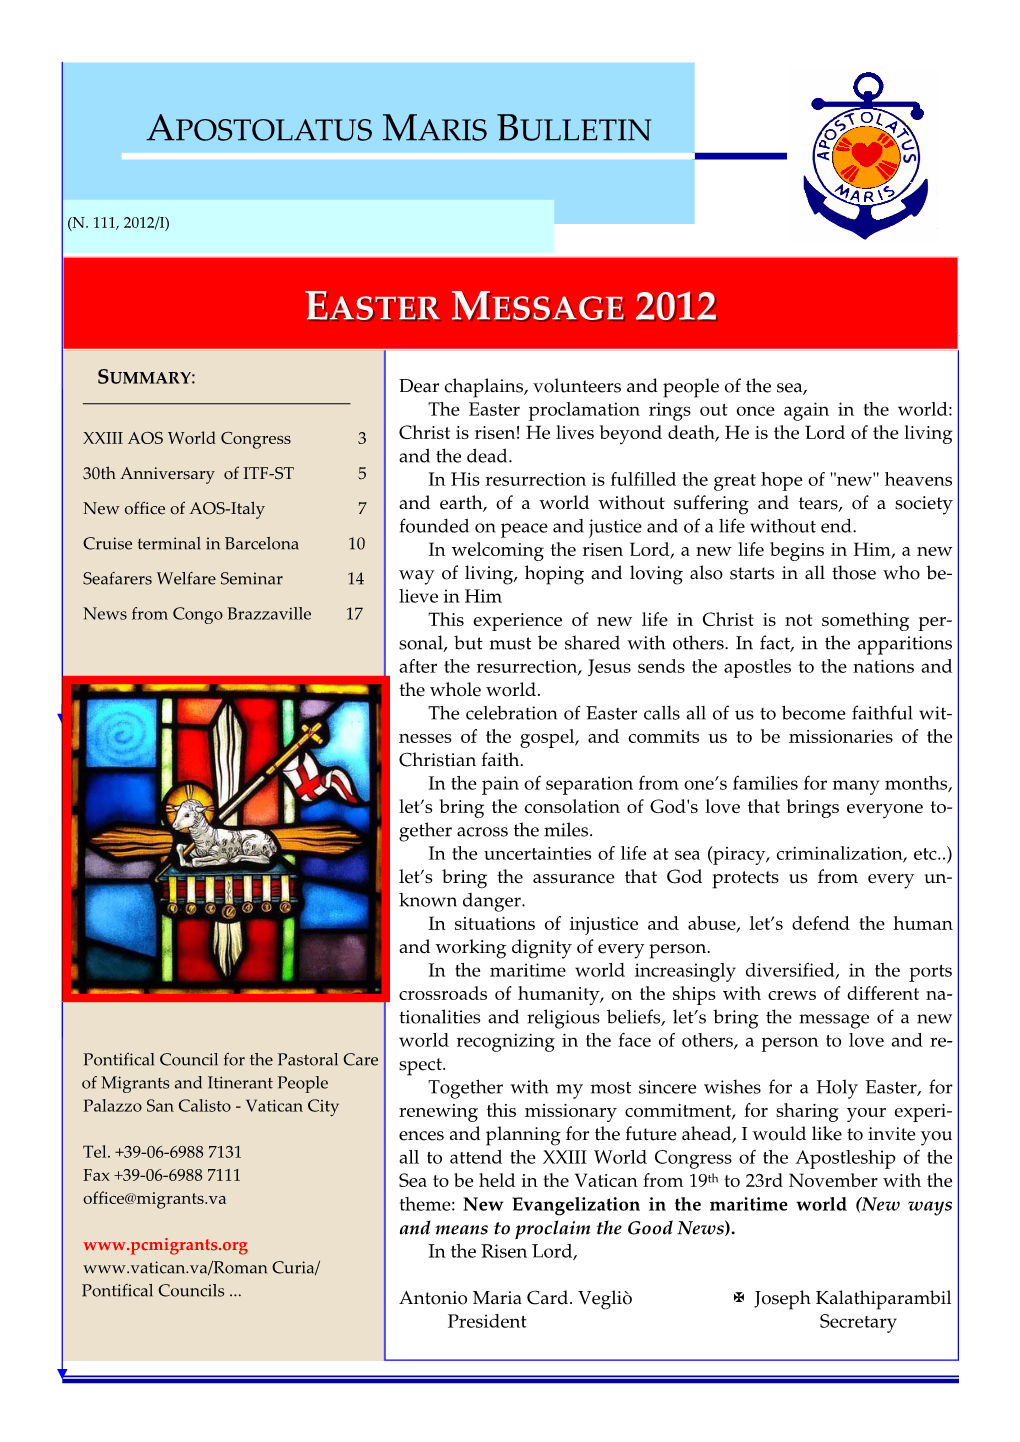 Easter Message 2012